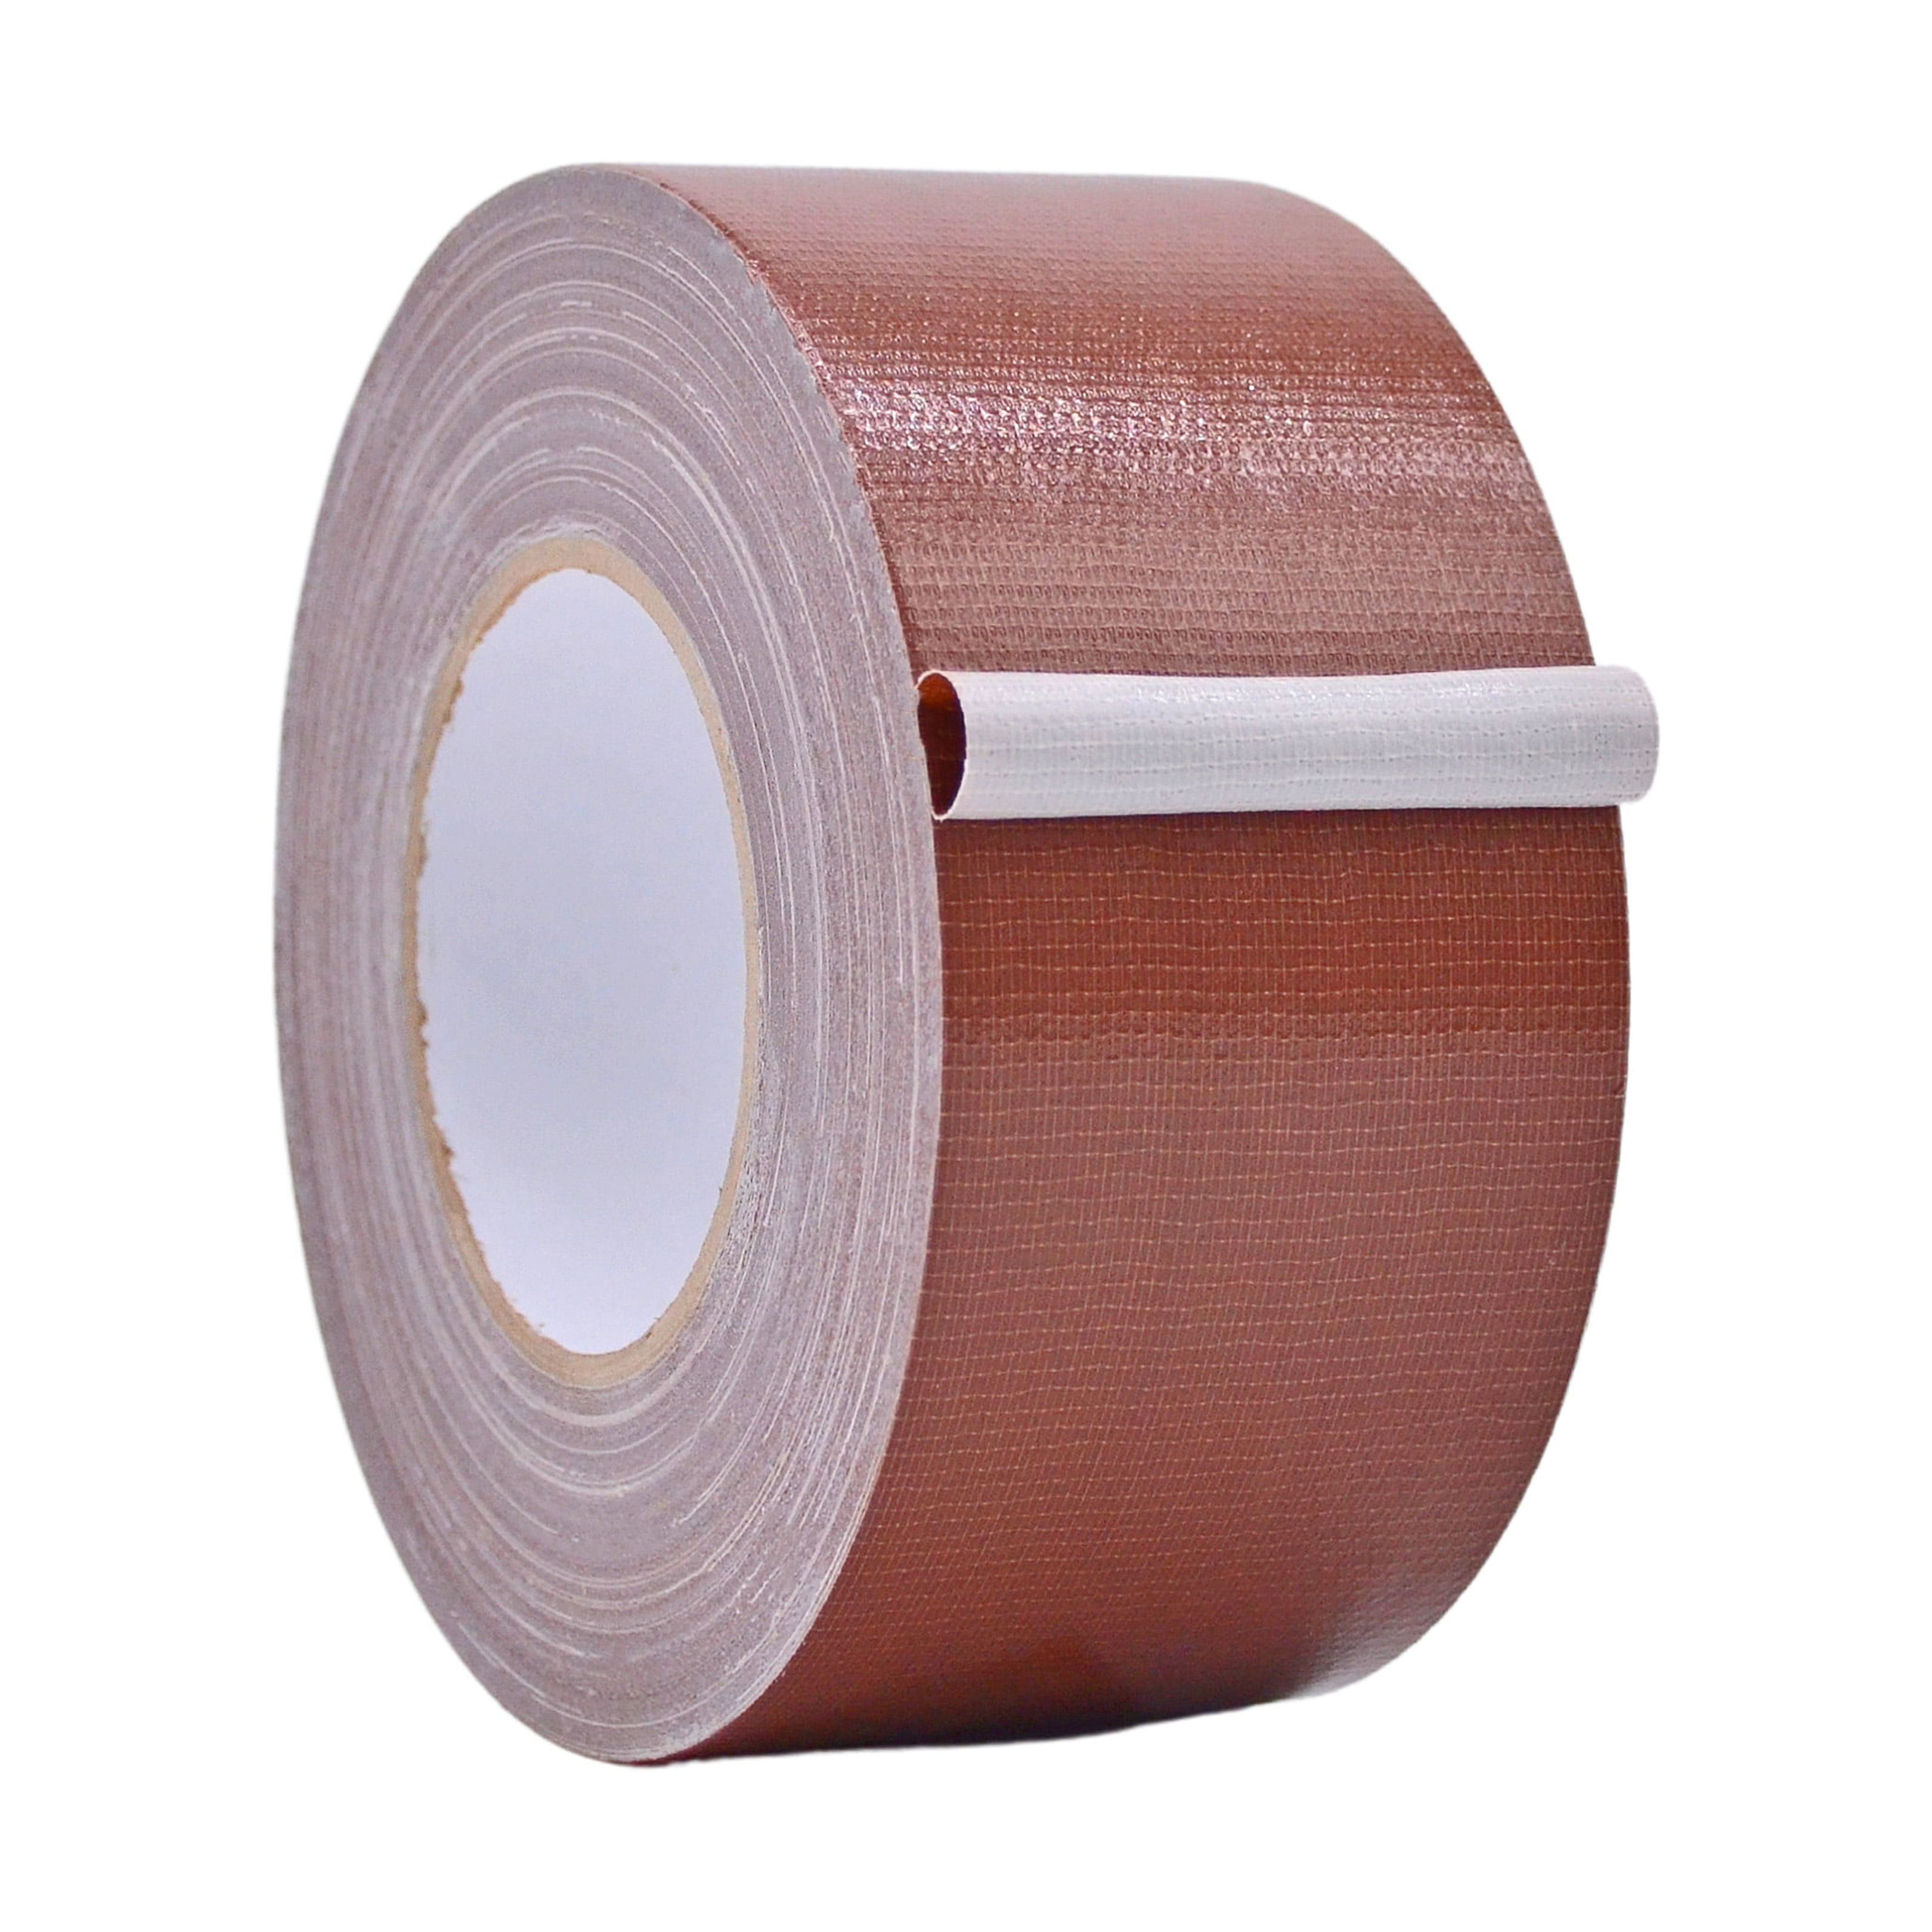 Wod Dtc10 Advanced Strength Industrial Grade Brown Duct Tape, 3 inch x 60 yds. Waterproof, UV Resistant for Crafts & Home Improvement